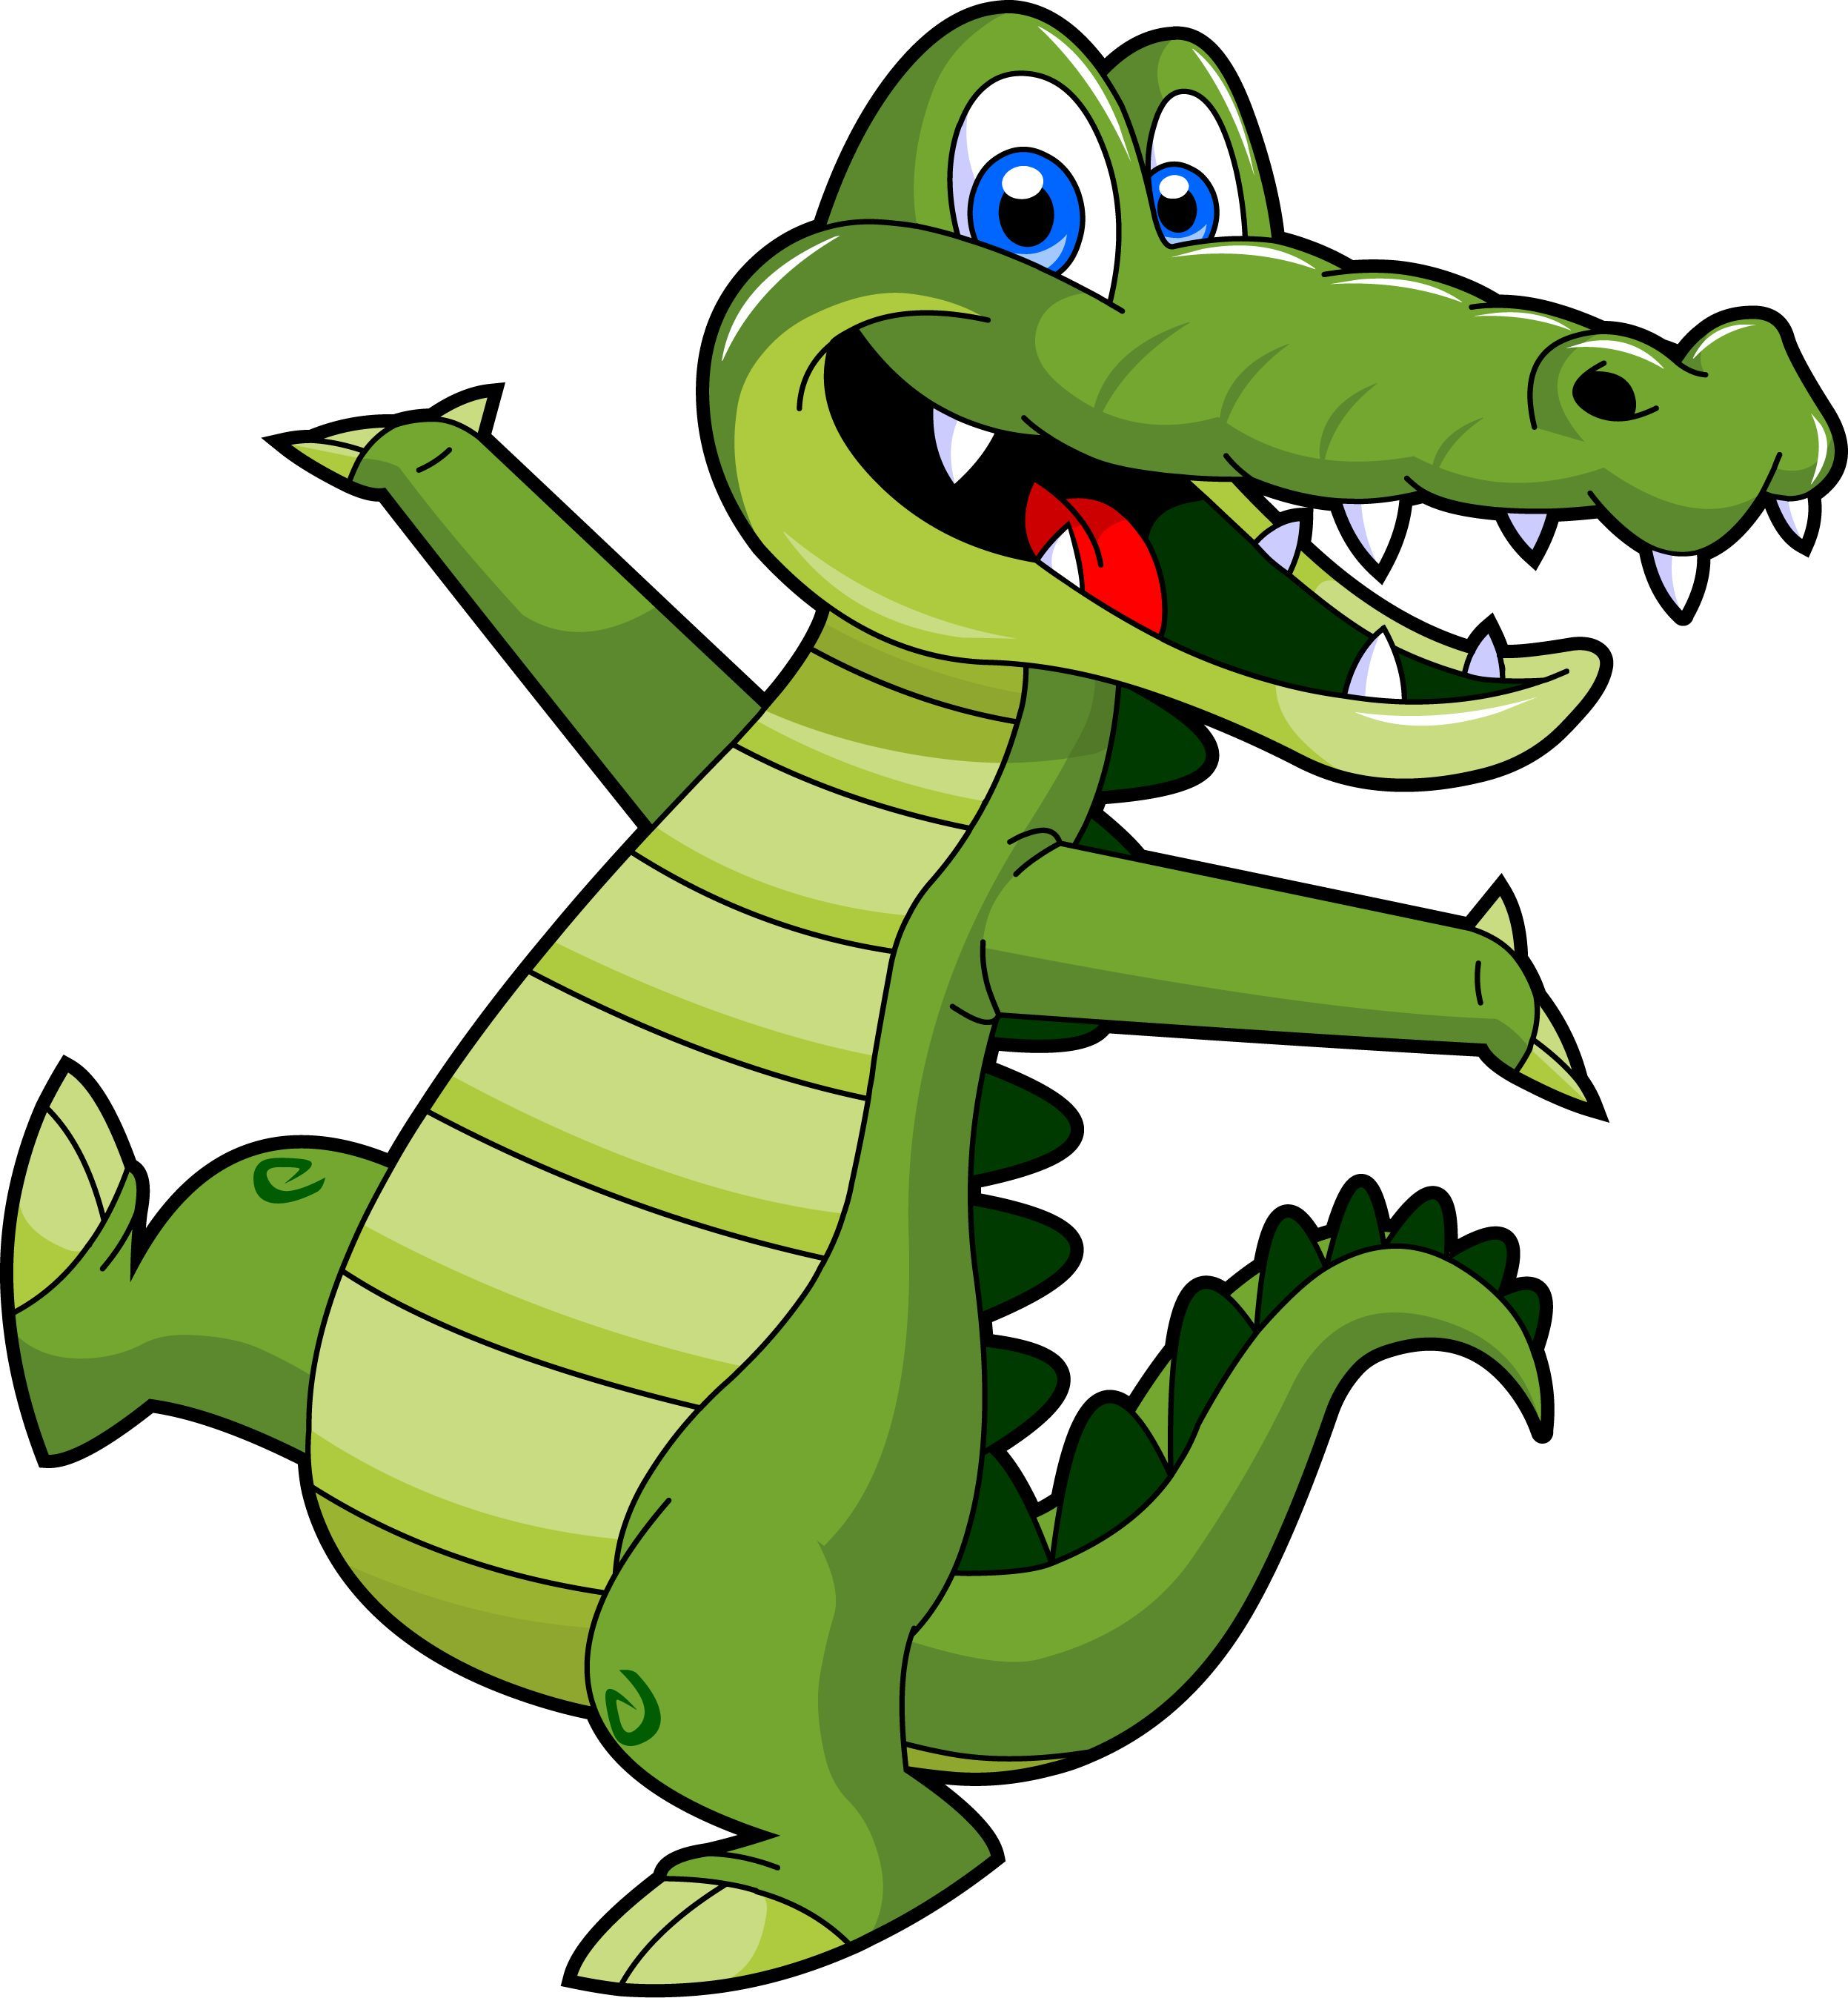 Alligator clipart. Cute baby free images